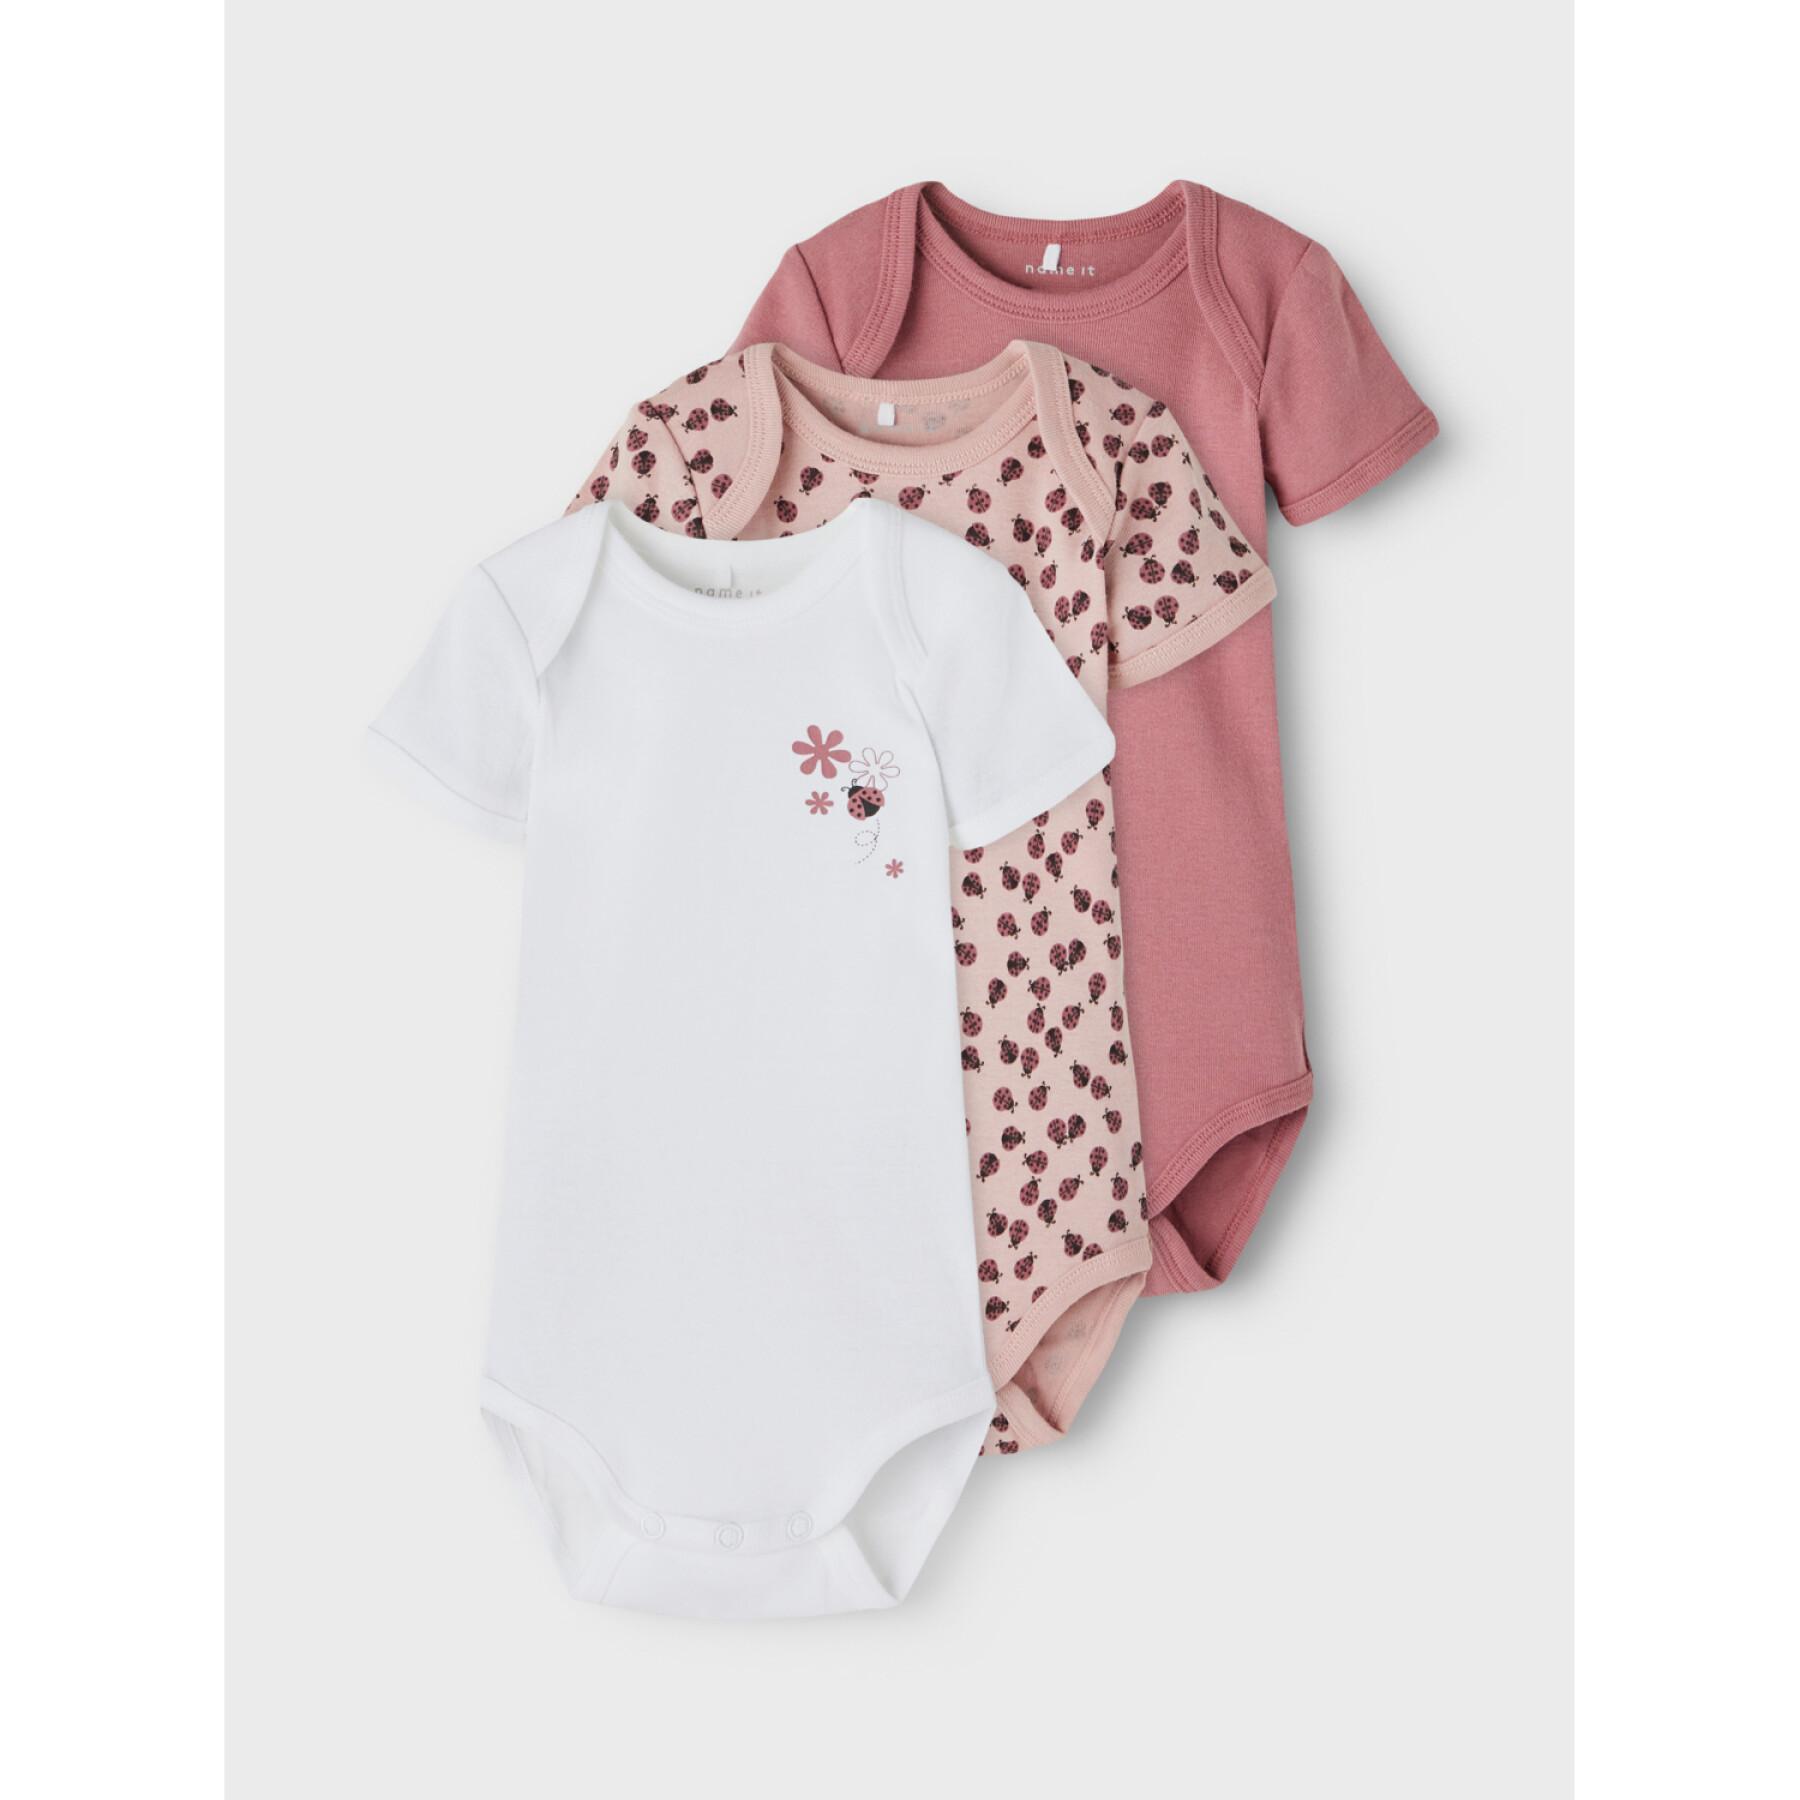 Pack of 3 baby bodysuits Name it Deco